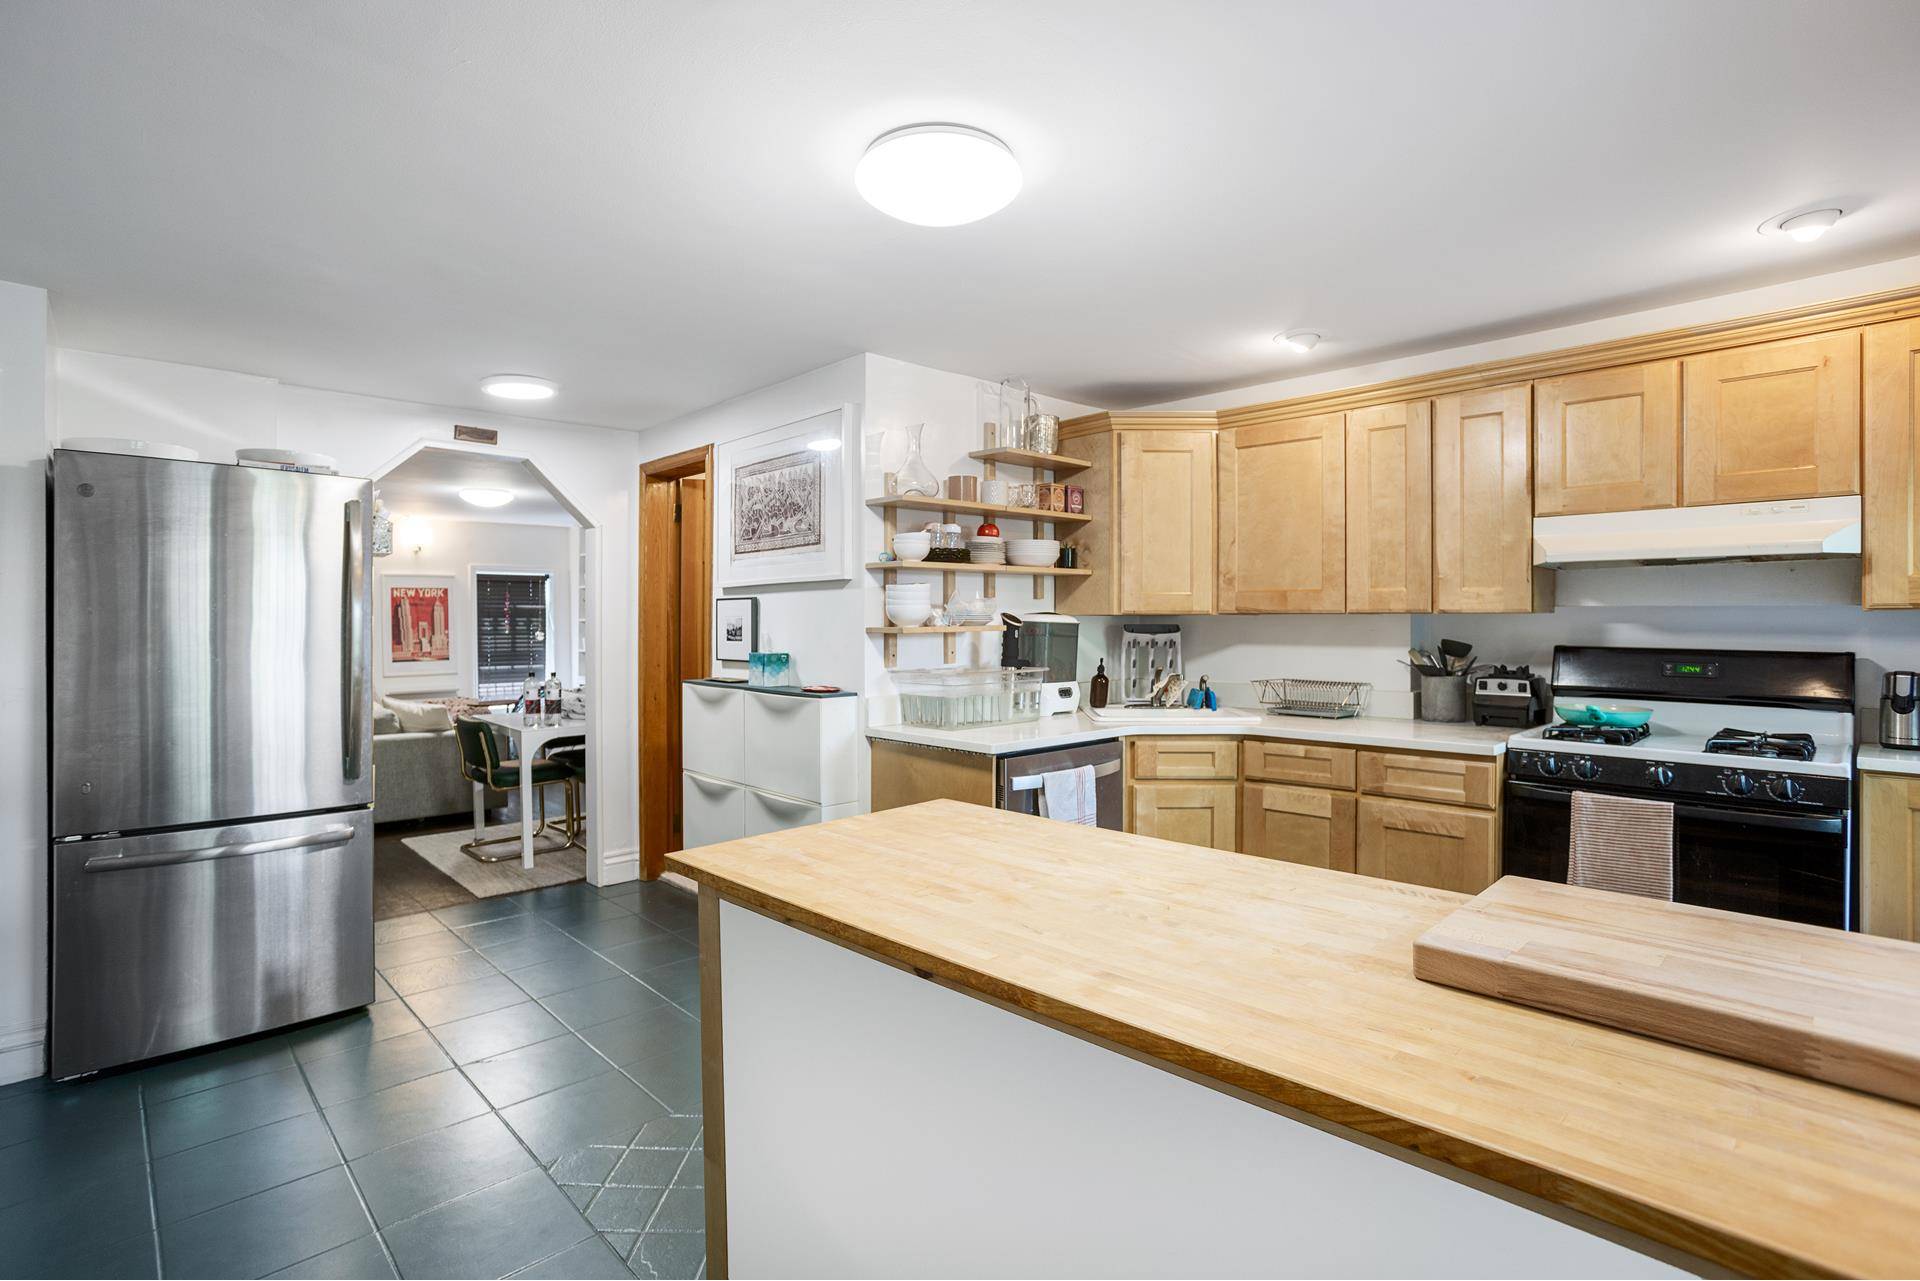 SHOWING BY APPOINTMENT ONLY PLEASE INQUIRE TO SCHEDULE BUYER MUST SHOW PRE APPROVAL OR PROOF OF FUNDS FOR APPOINTMENT Extremely rare amp ; special offering on a landmarked street in ...